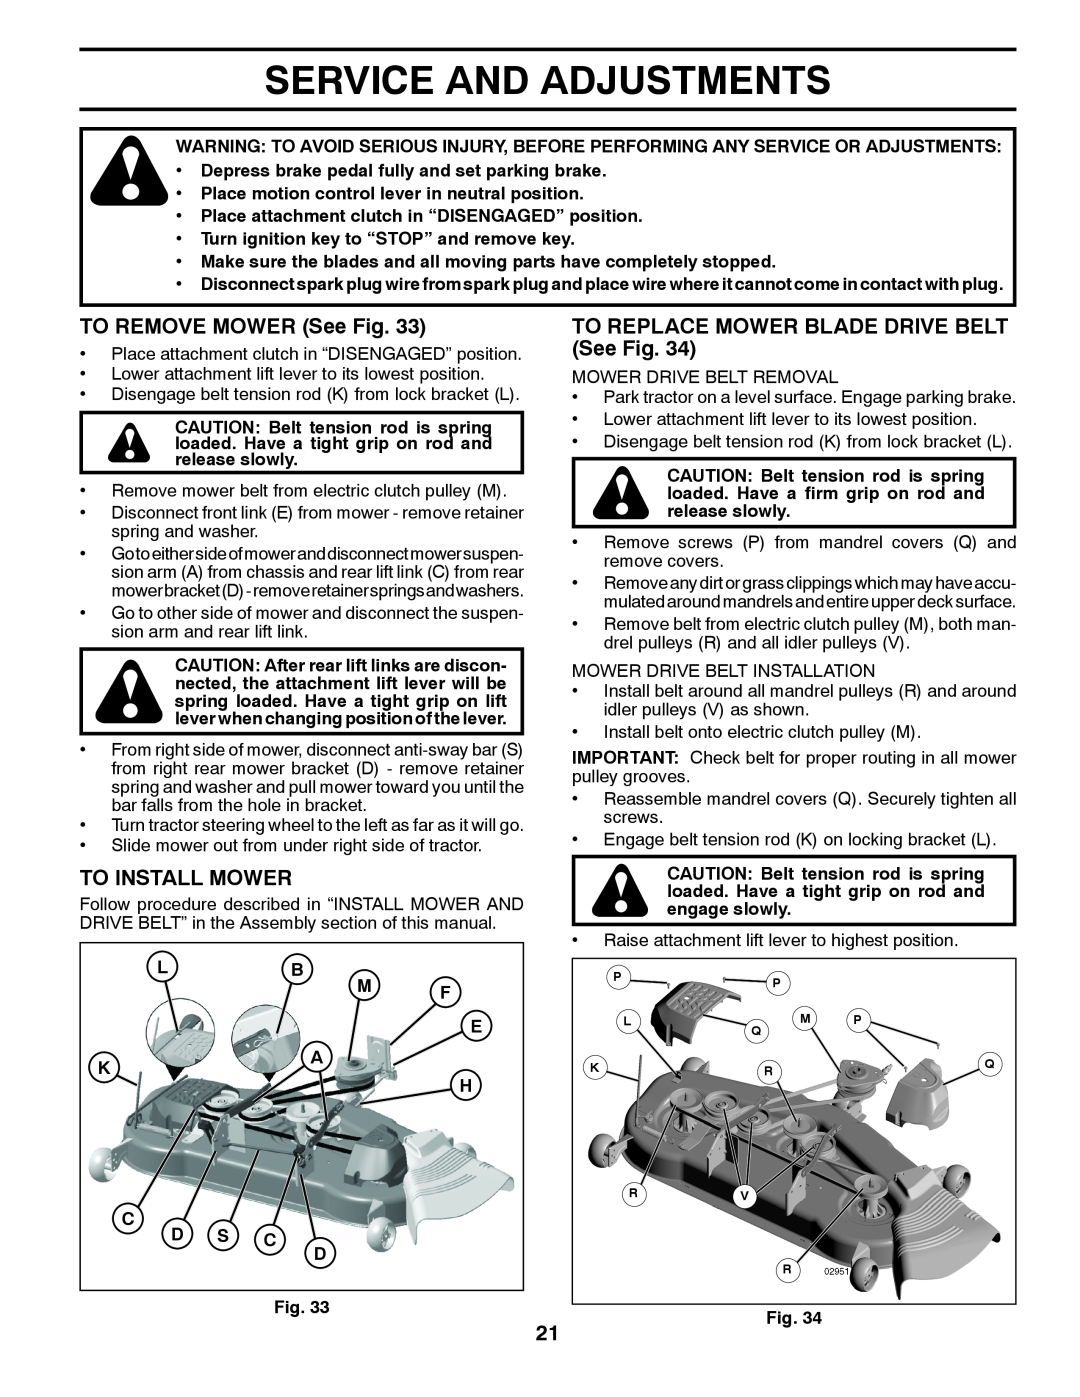 Husqvarna LGT24K54 owner manual Service And Adjustments, TO REMOVE MOWER See Fig, To Install Mower 